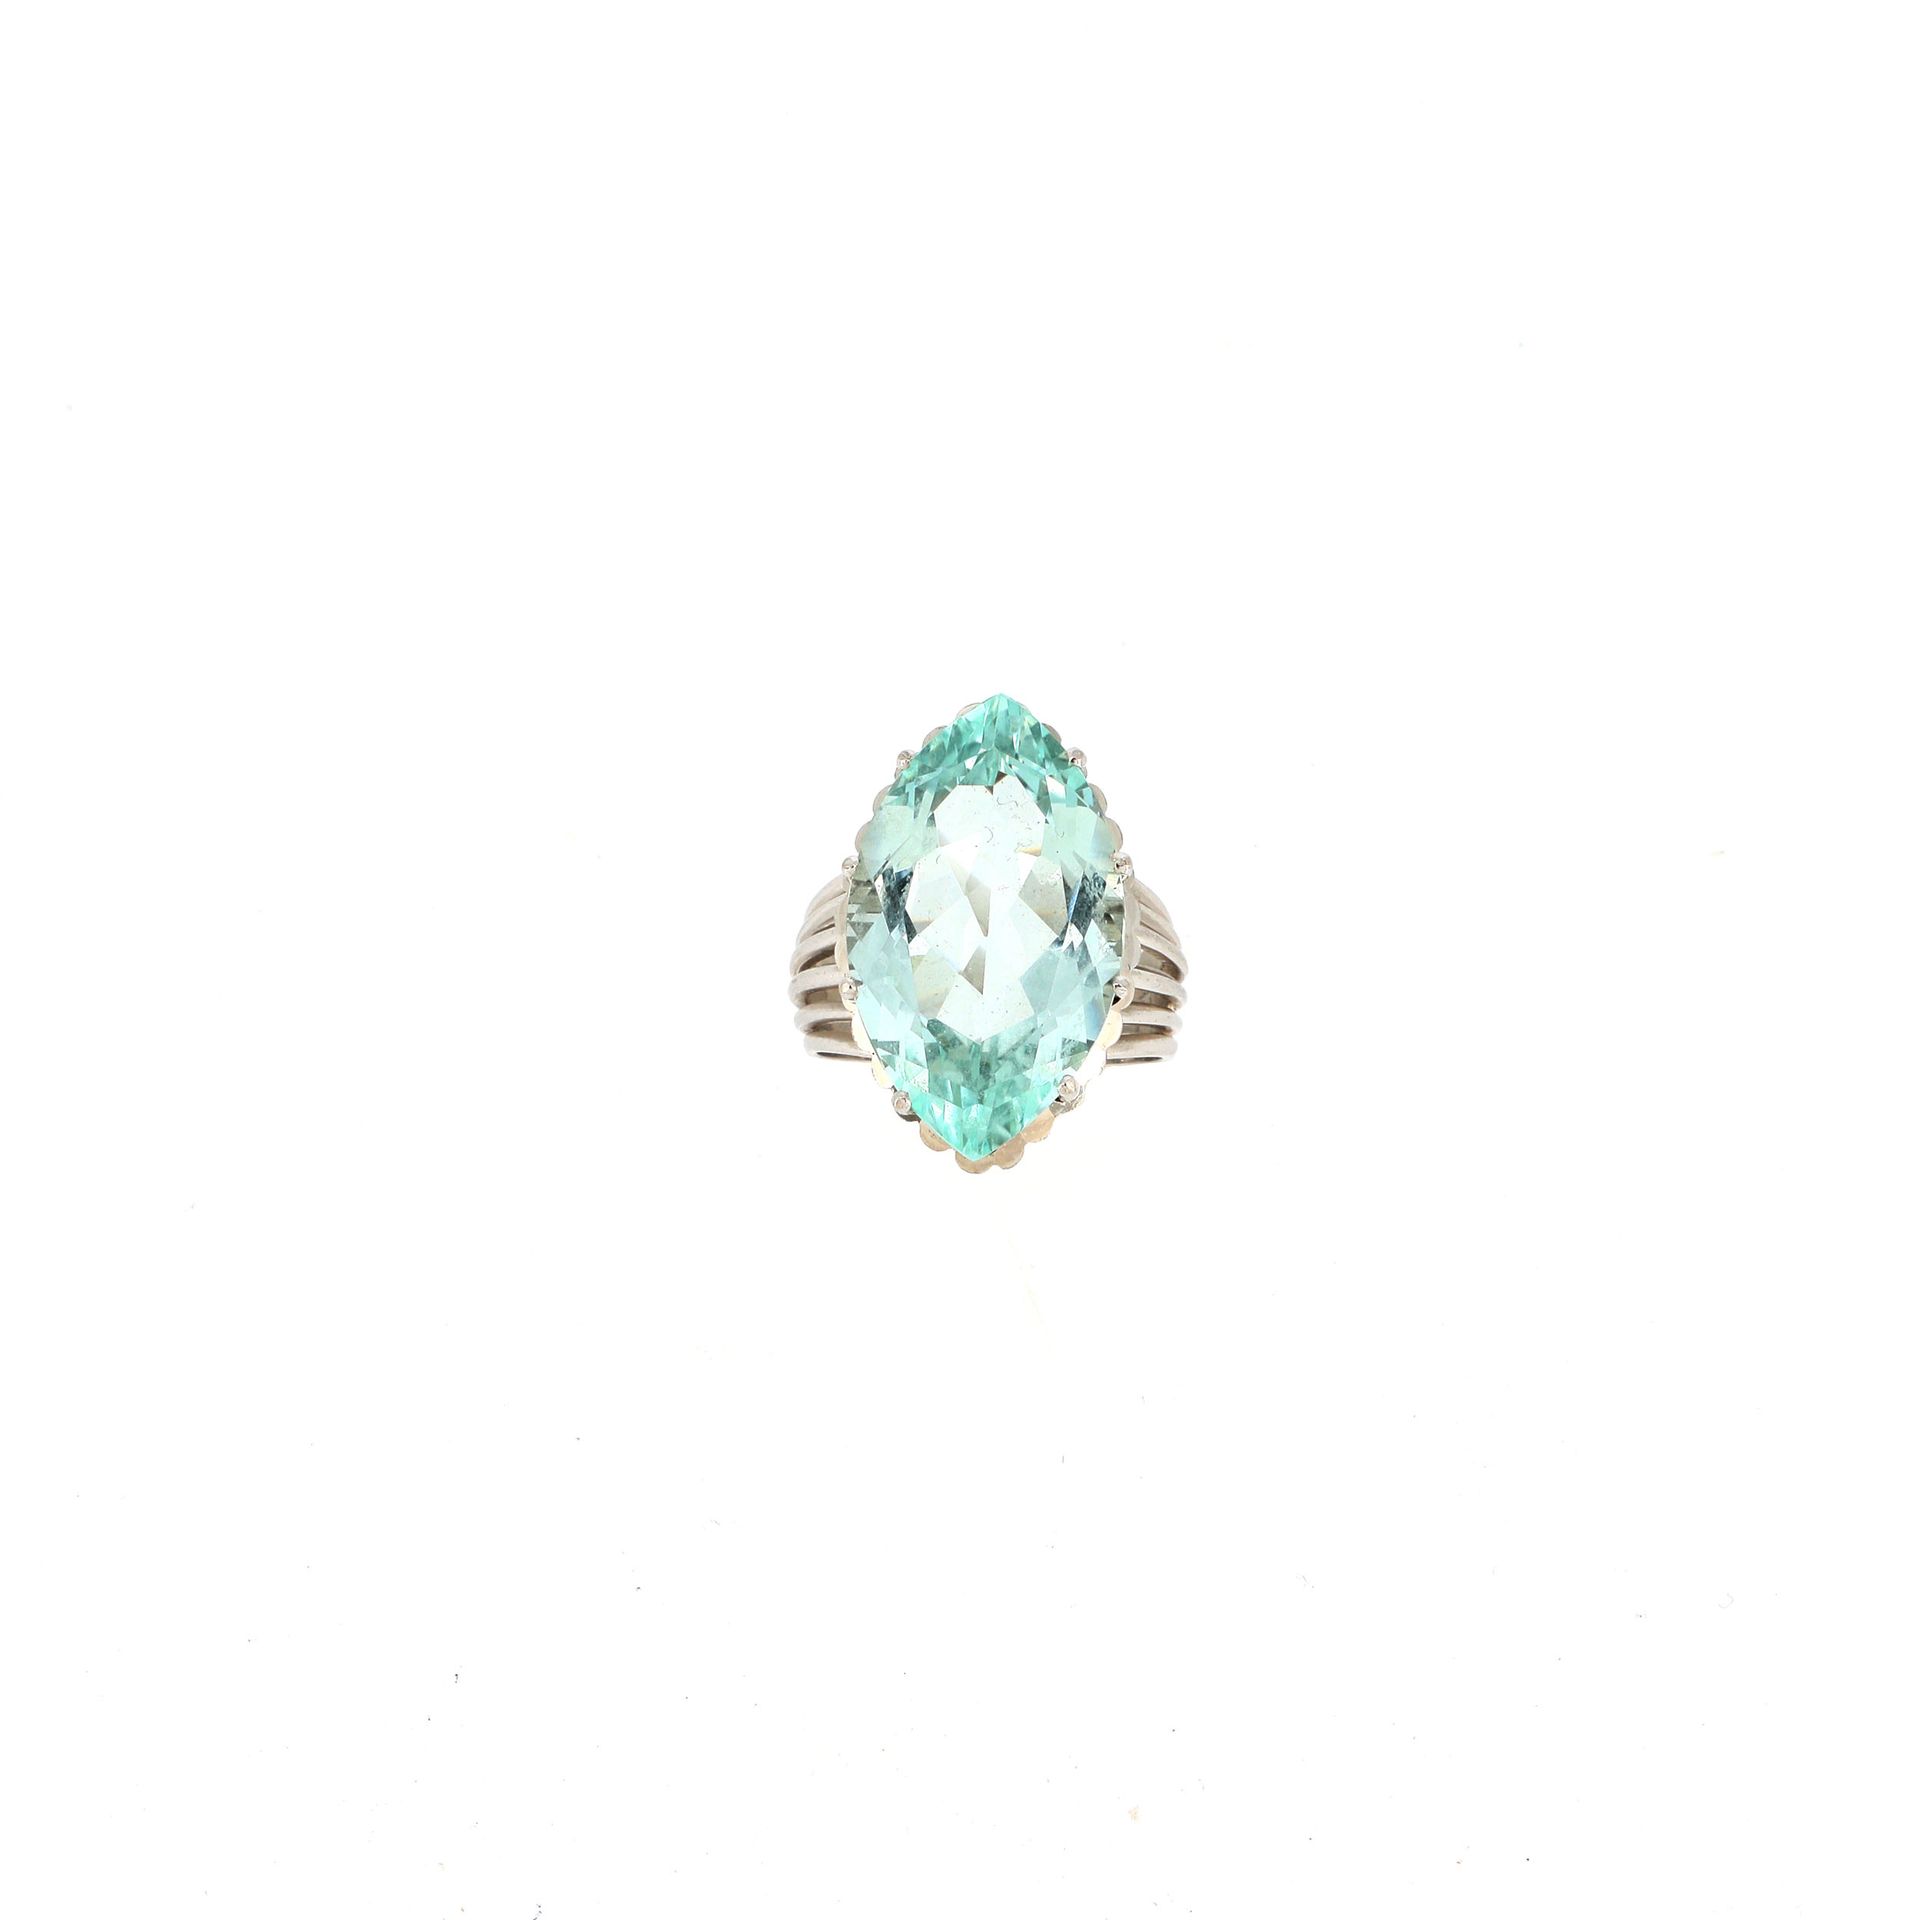 Null RING
in white gold wire, set with a marquise-cut aquamarine.
An aquamarine &hellip;